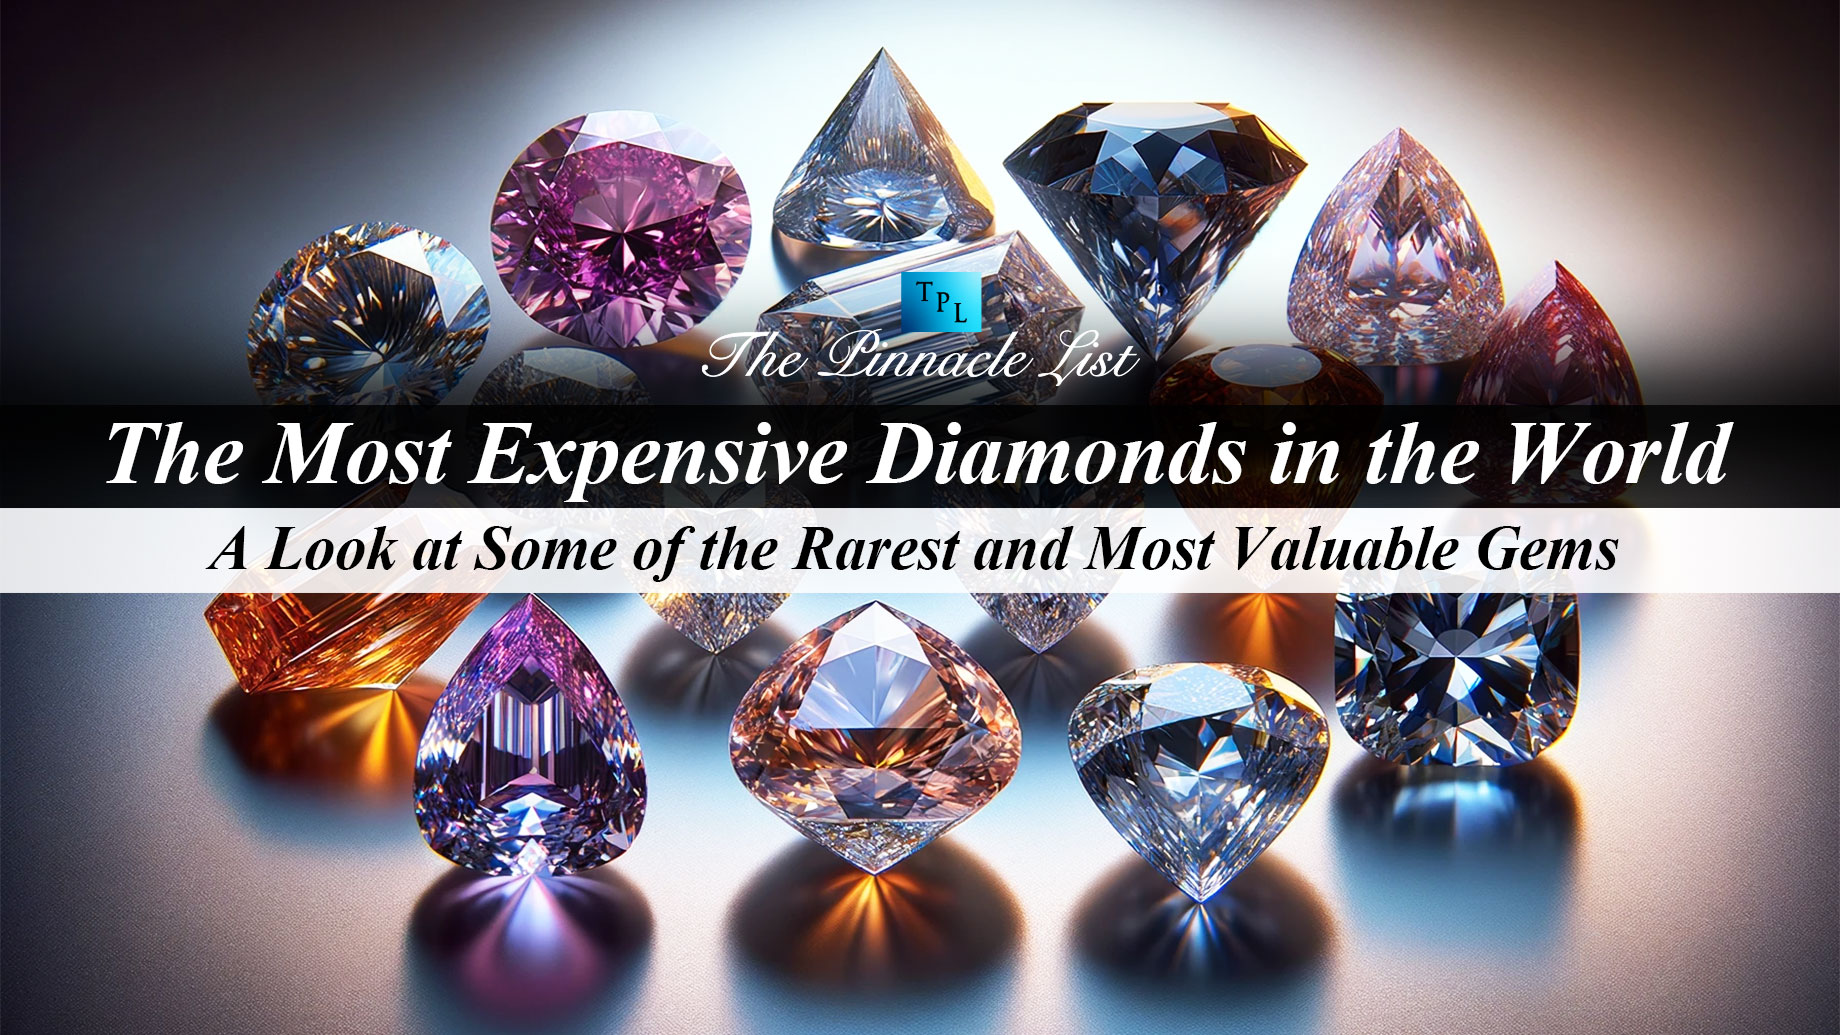 The Most Expensive Diamonds in the World: A Look at Some of the Rarest and Most Valuable Gems